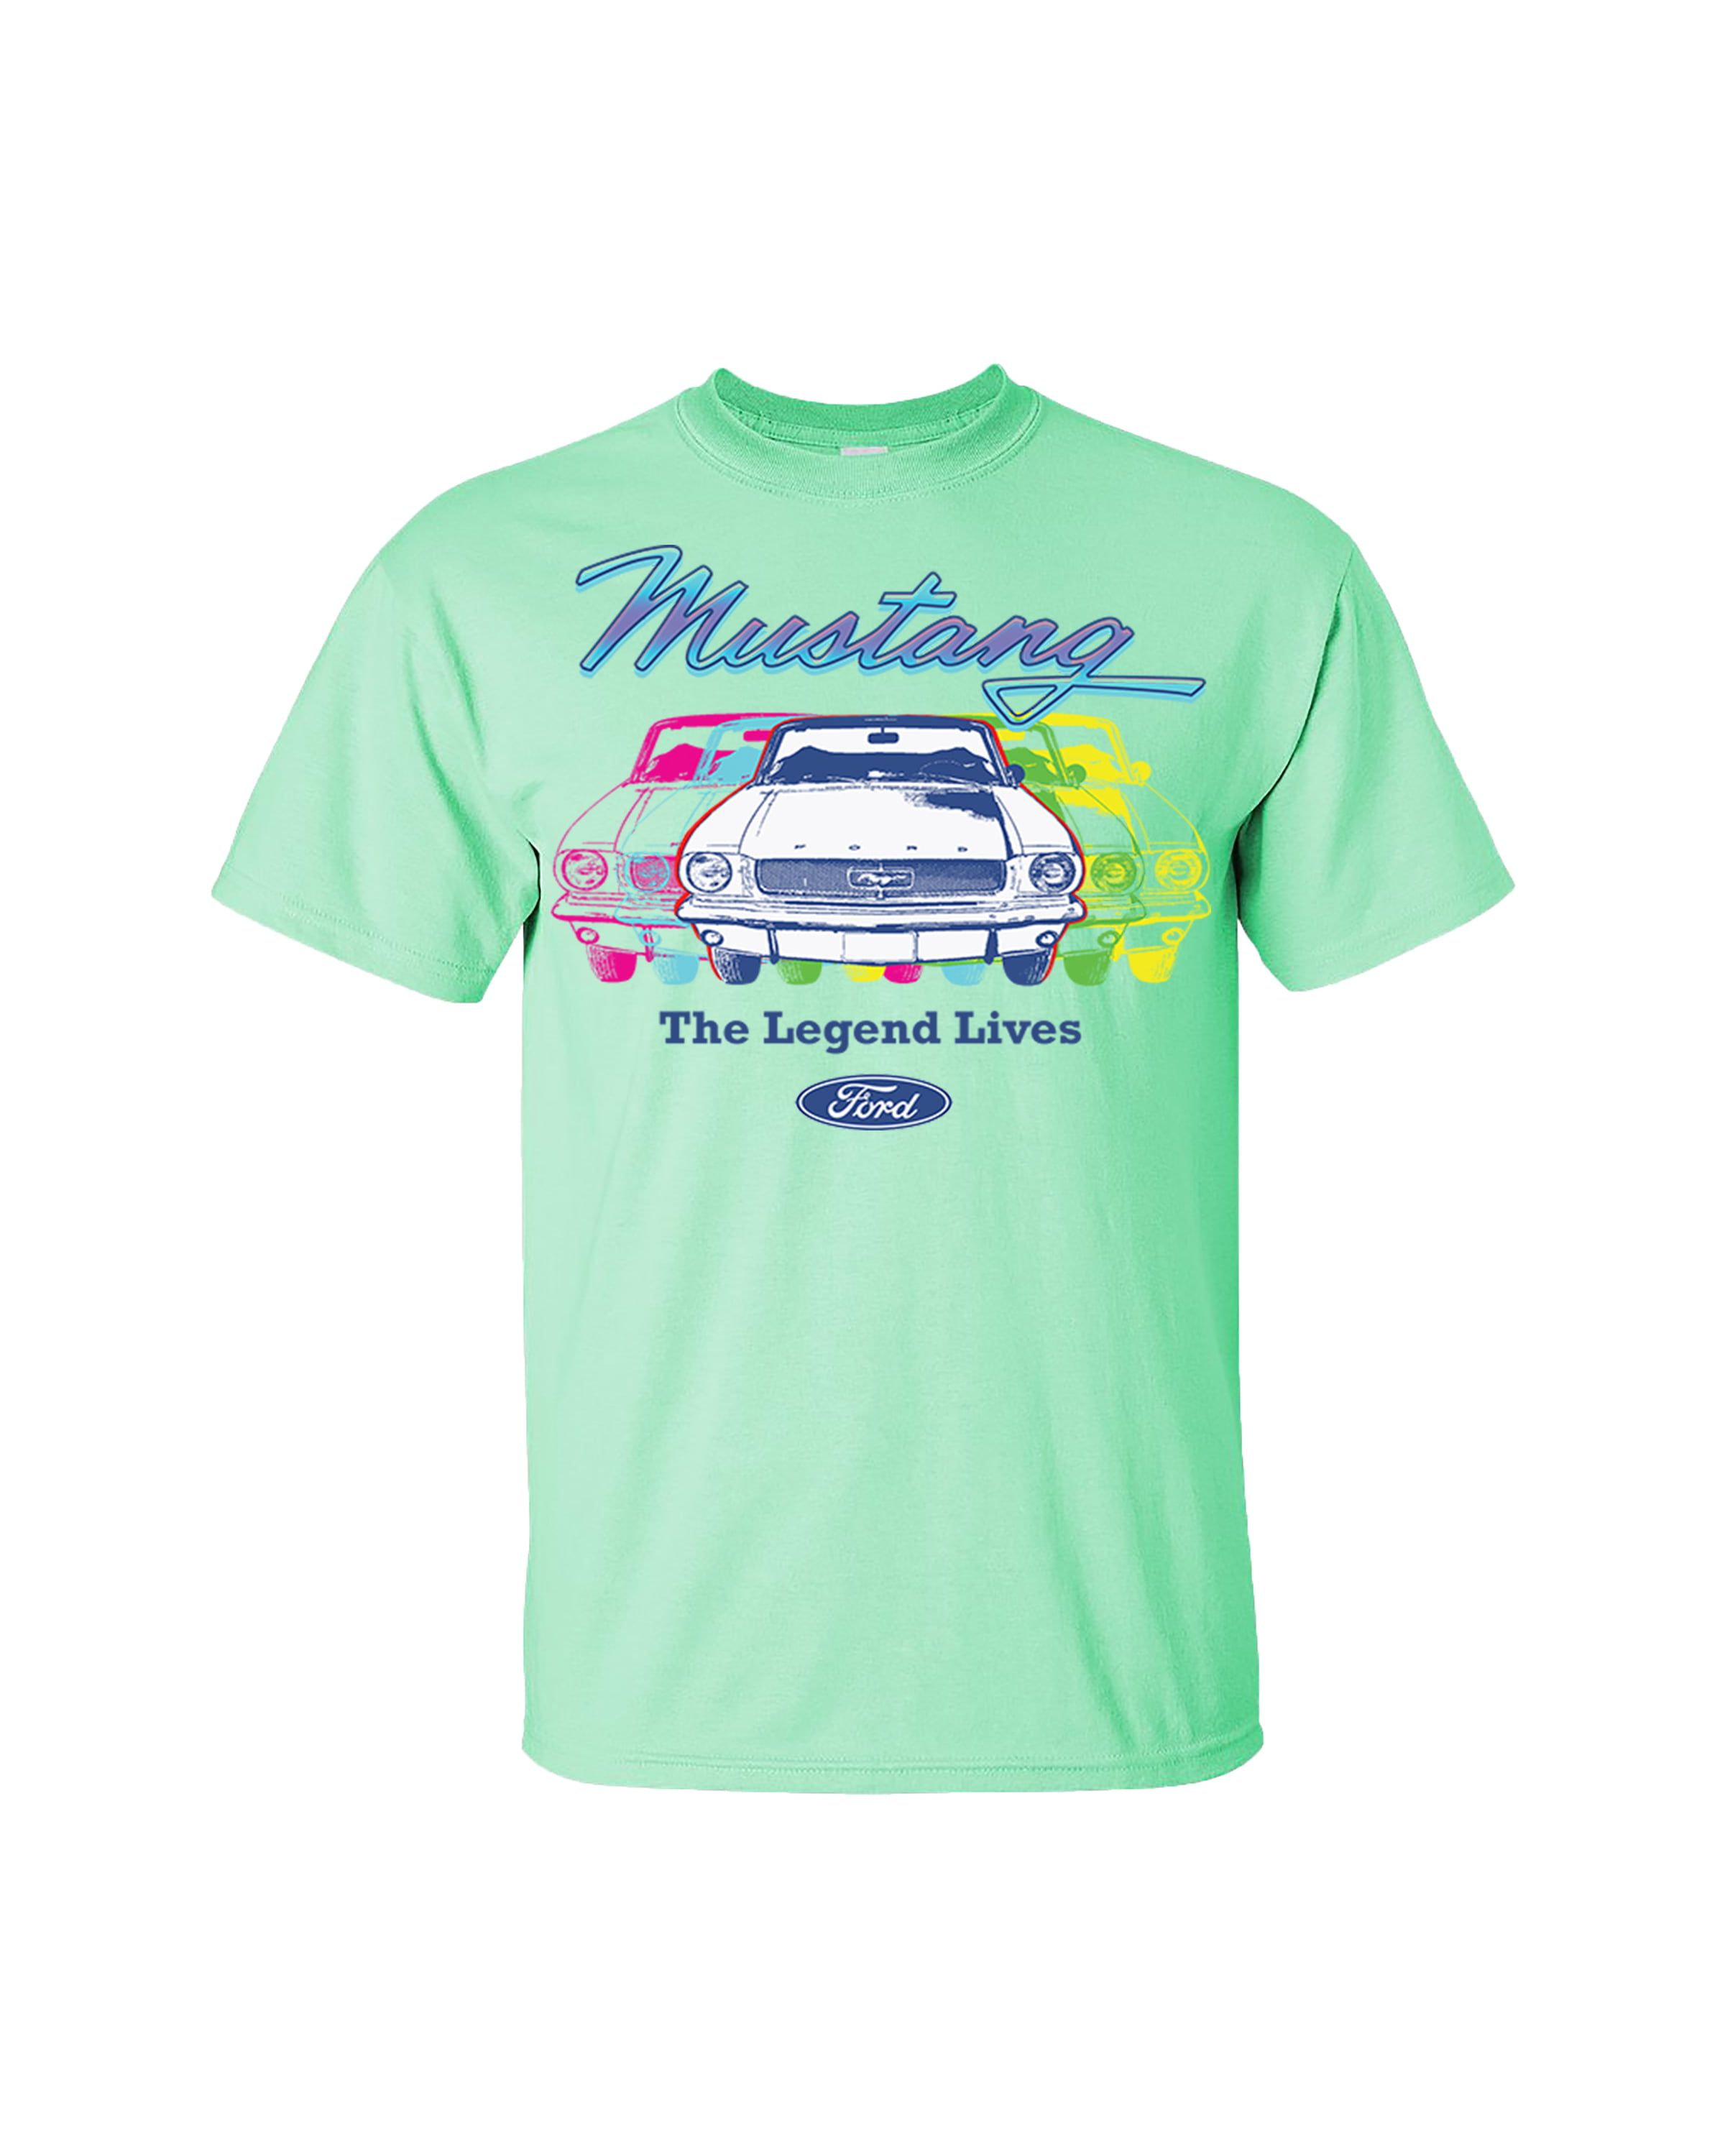 Retro Mustang Graphic Ford Legend Sleeve Short T-shirt-Pink-xxxl The Lives